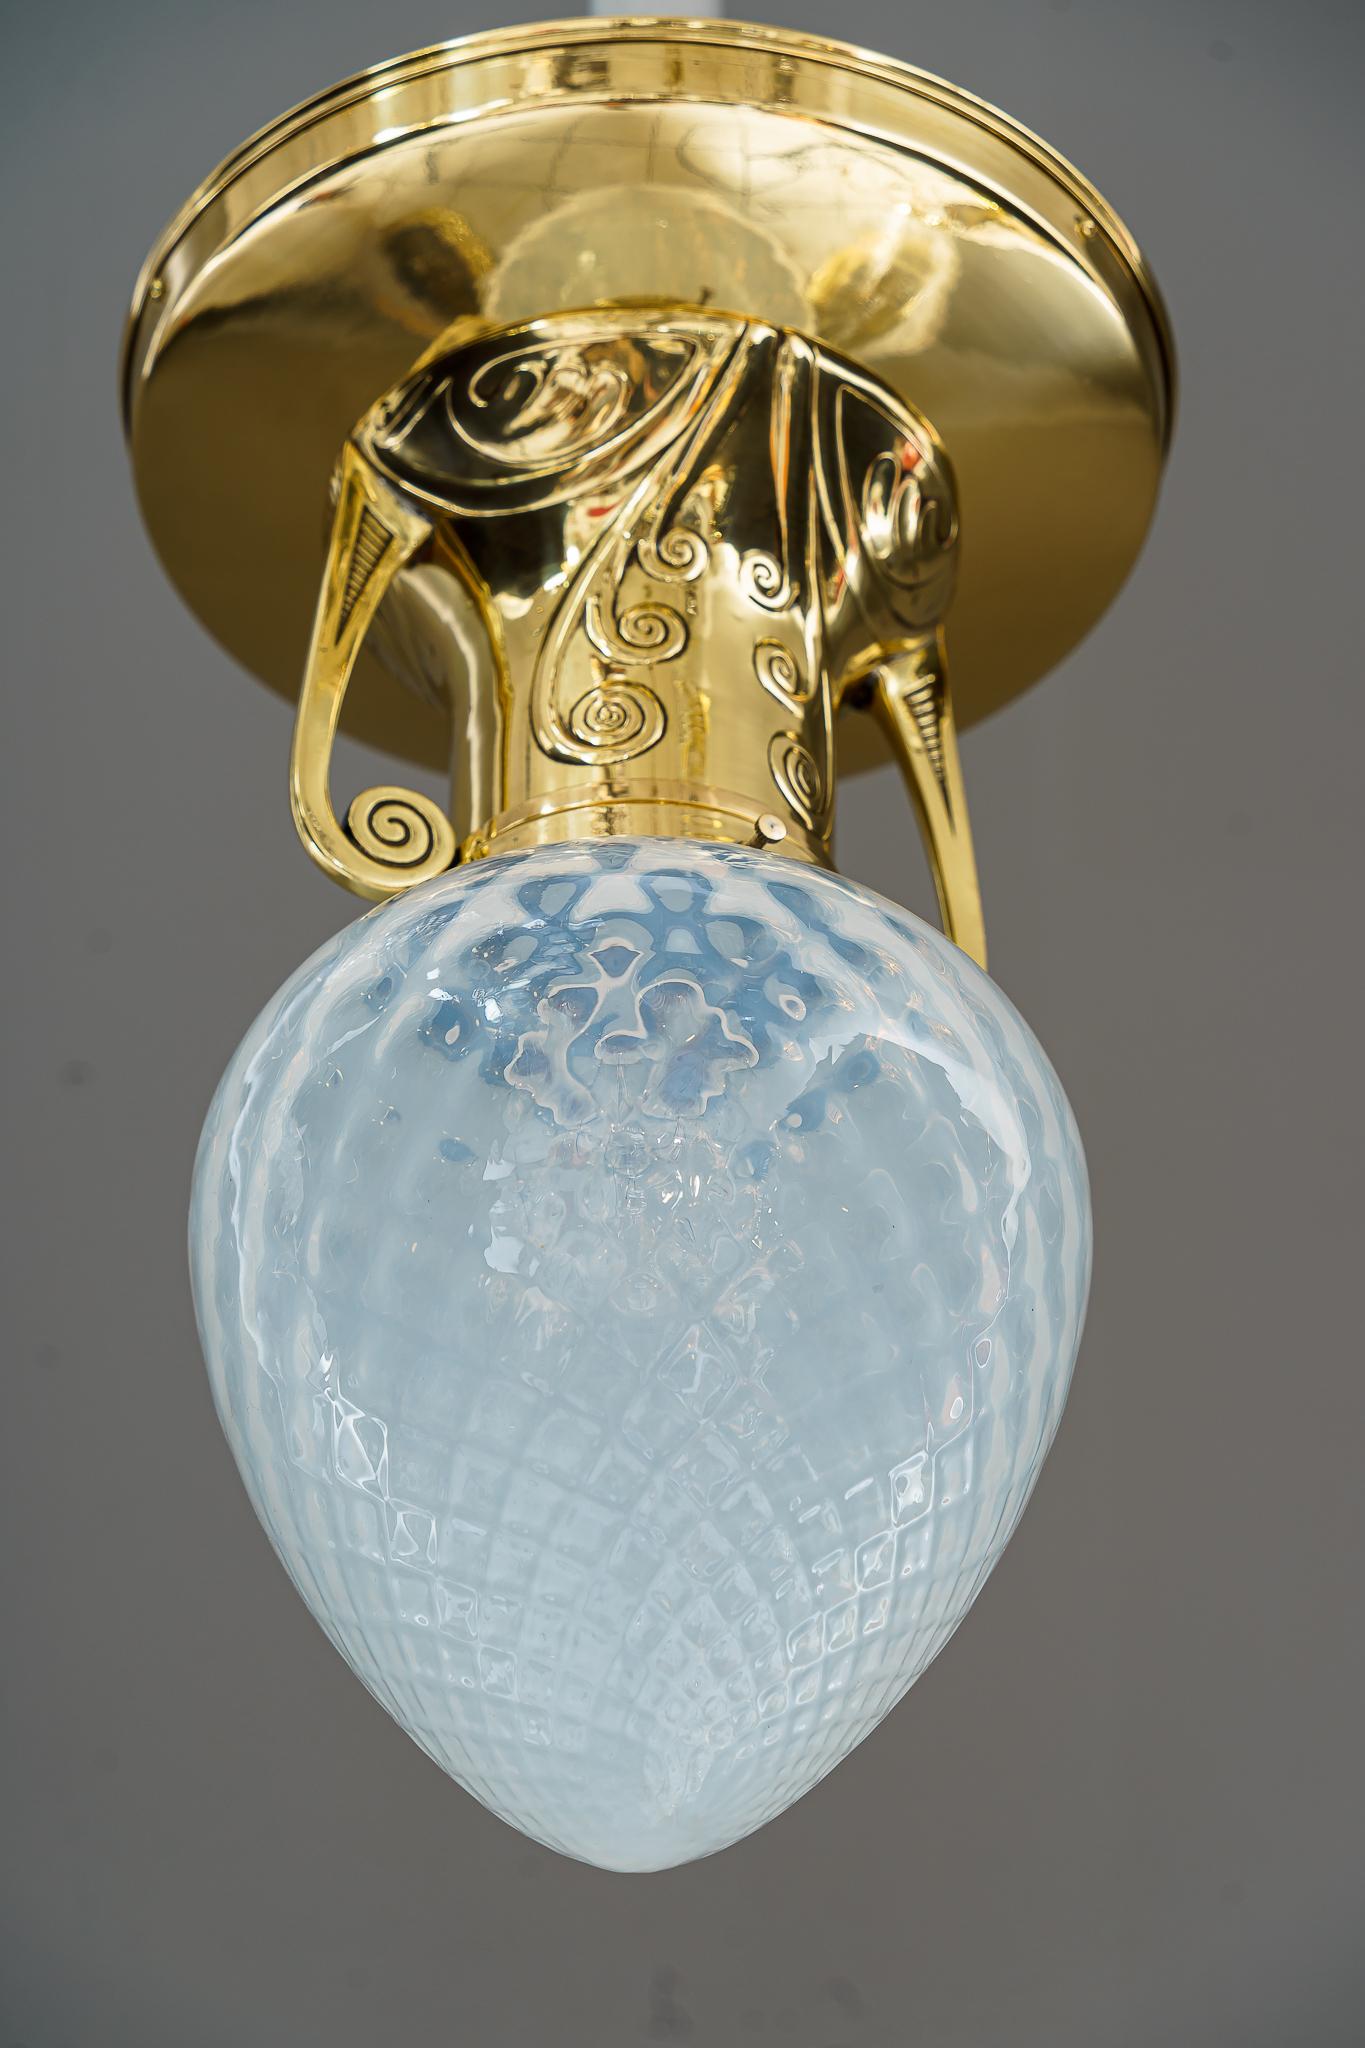 Art Deco ceiling lamp with opaline glass shade vienna around 1920
Polished and stove enameled
Original opaline glass shade.